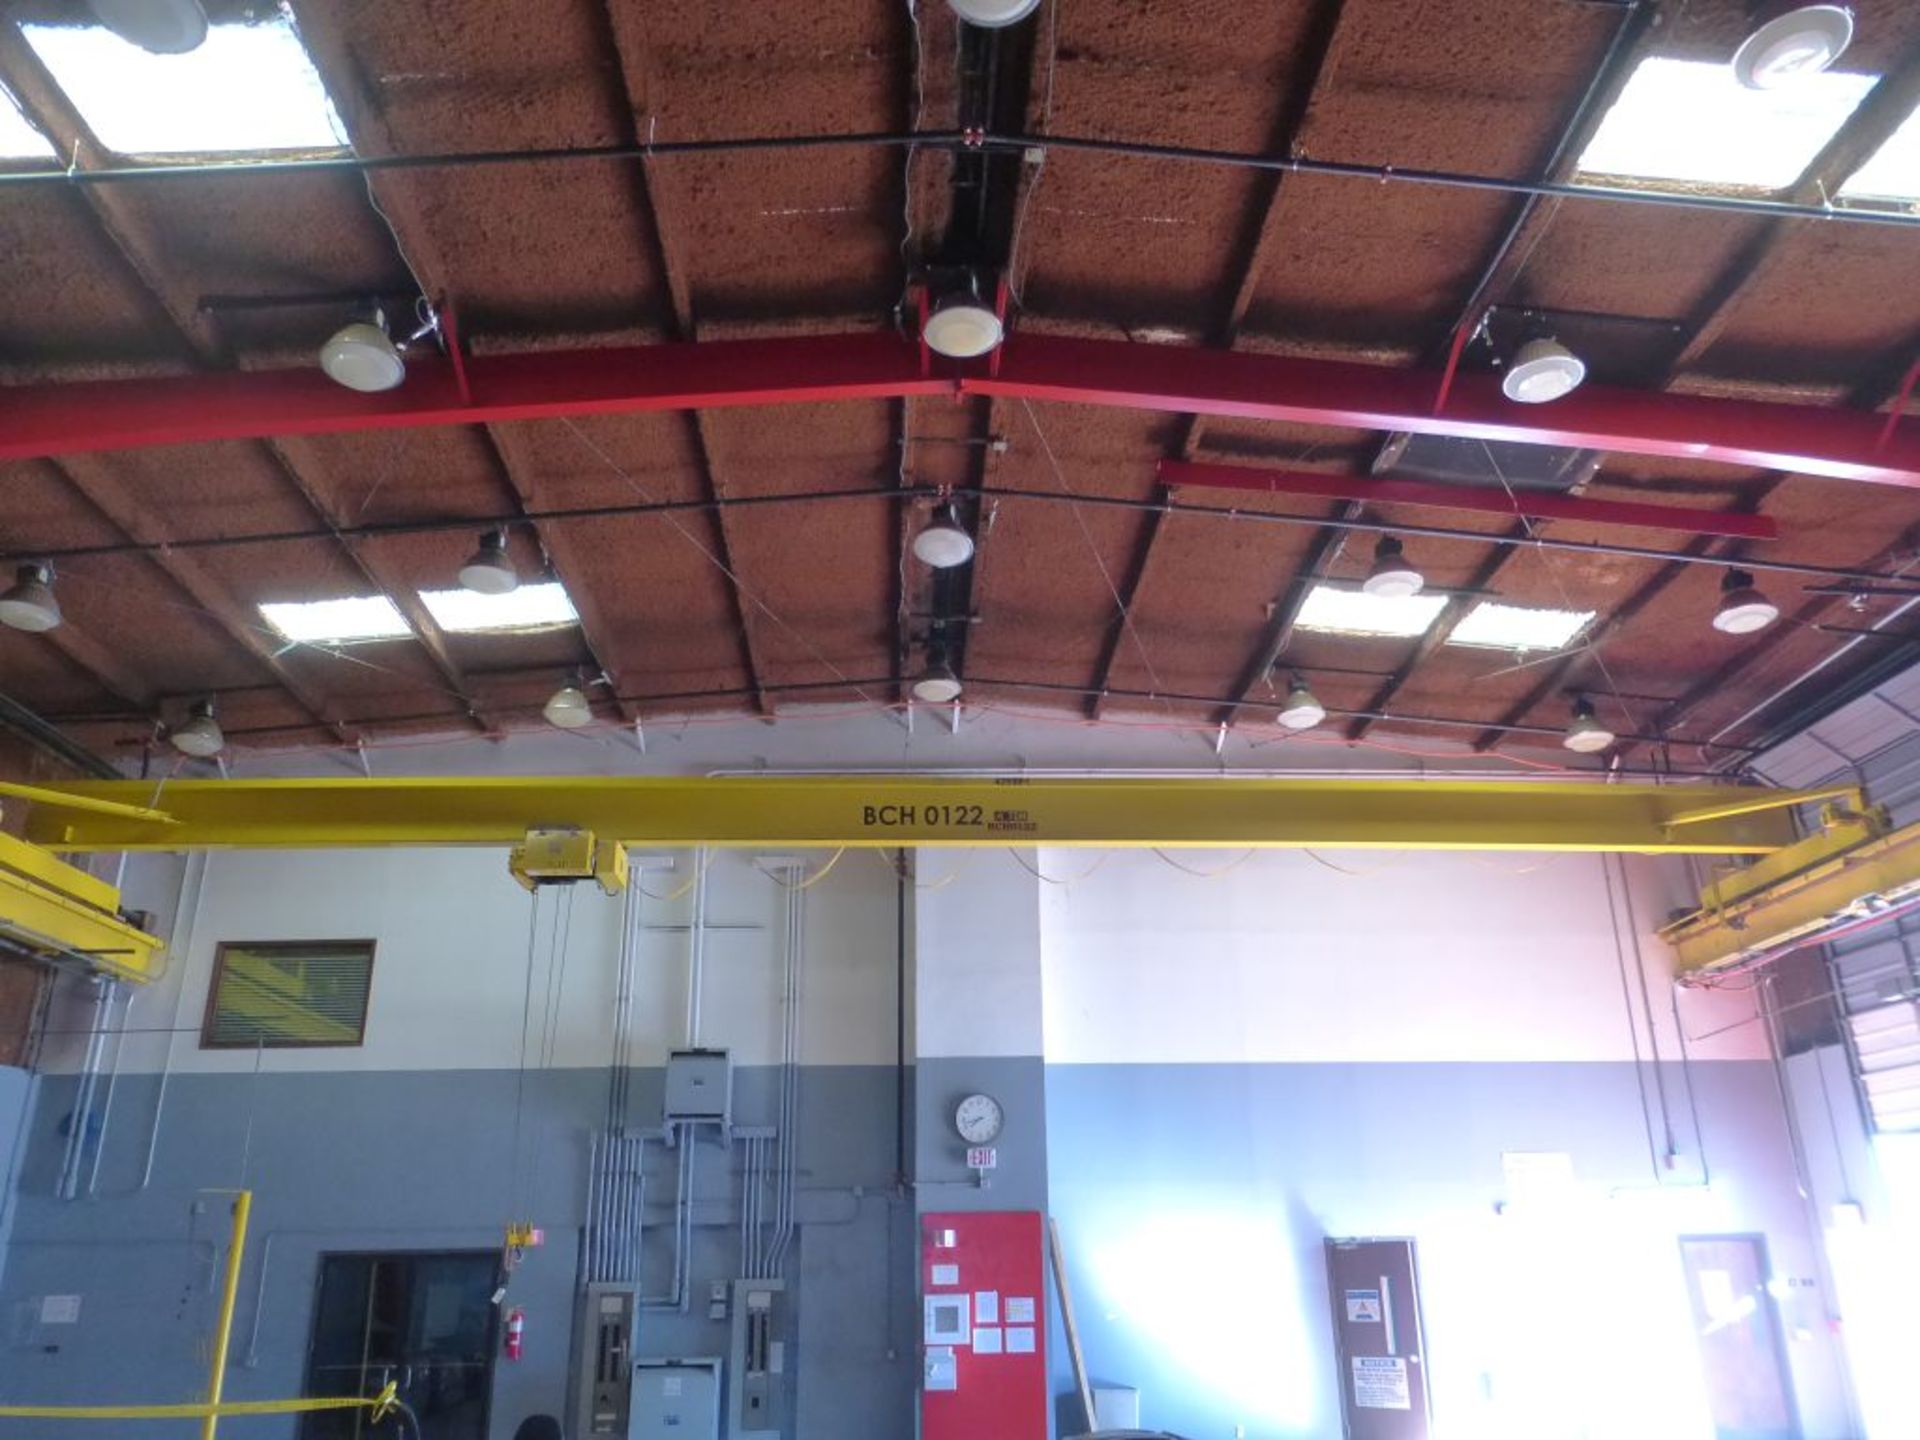 Abacus Equipment Inc 4 Ton Crane w/Wireless Controller | Serial No. BCH0122; Load Bar Span: 52'; - Image 2 of 7